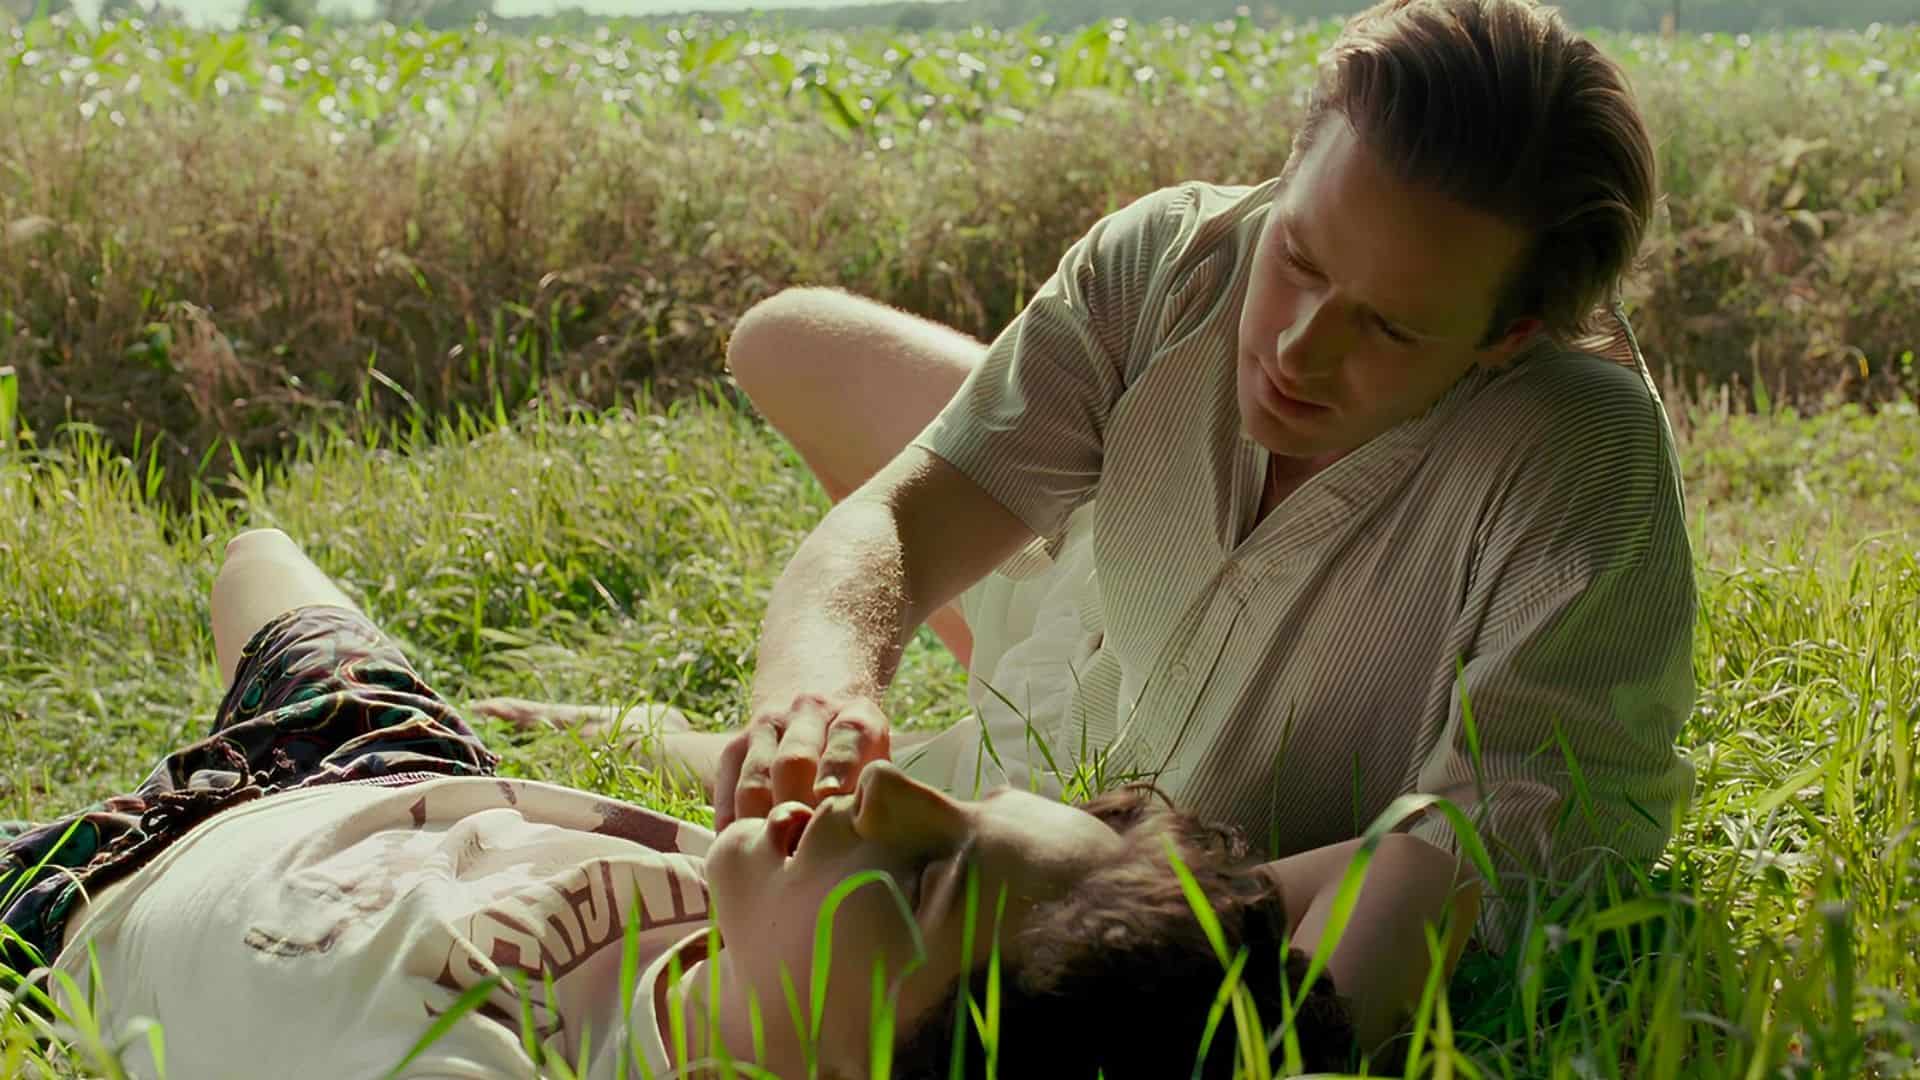 Two men lie next to each other in a grassy field in this image from Frenesy Film Company.